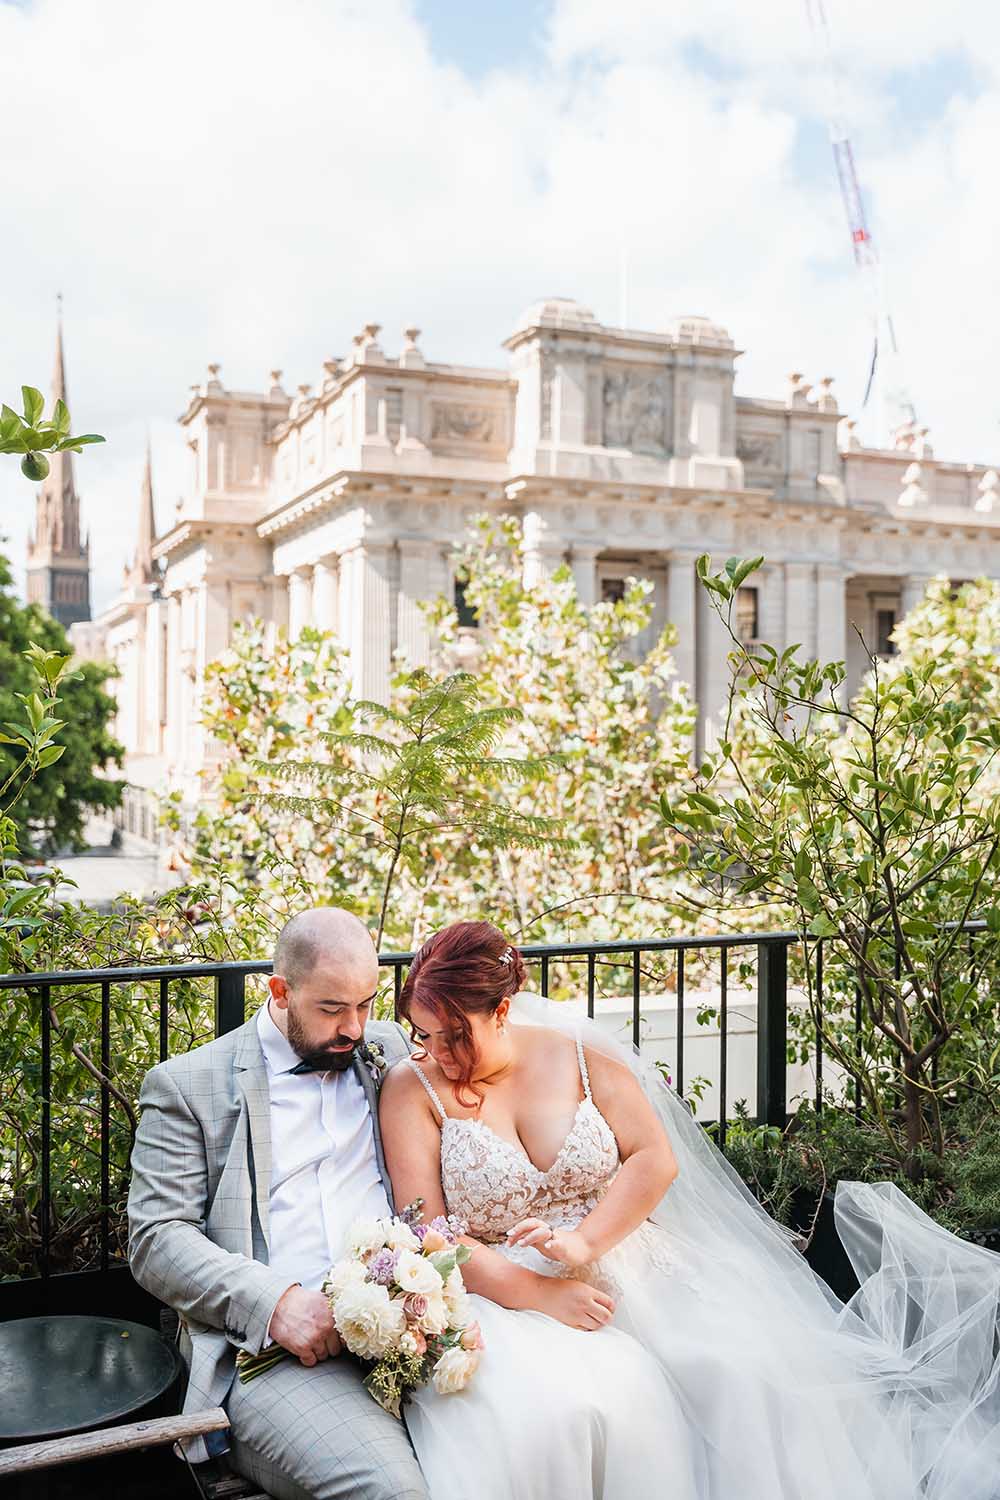 Destination Wedding Photography - Bride and Groom on Bench